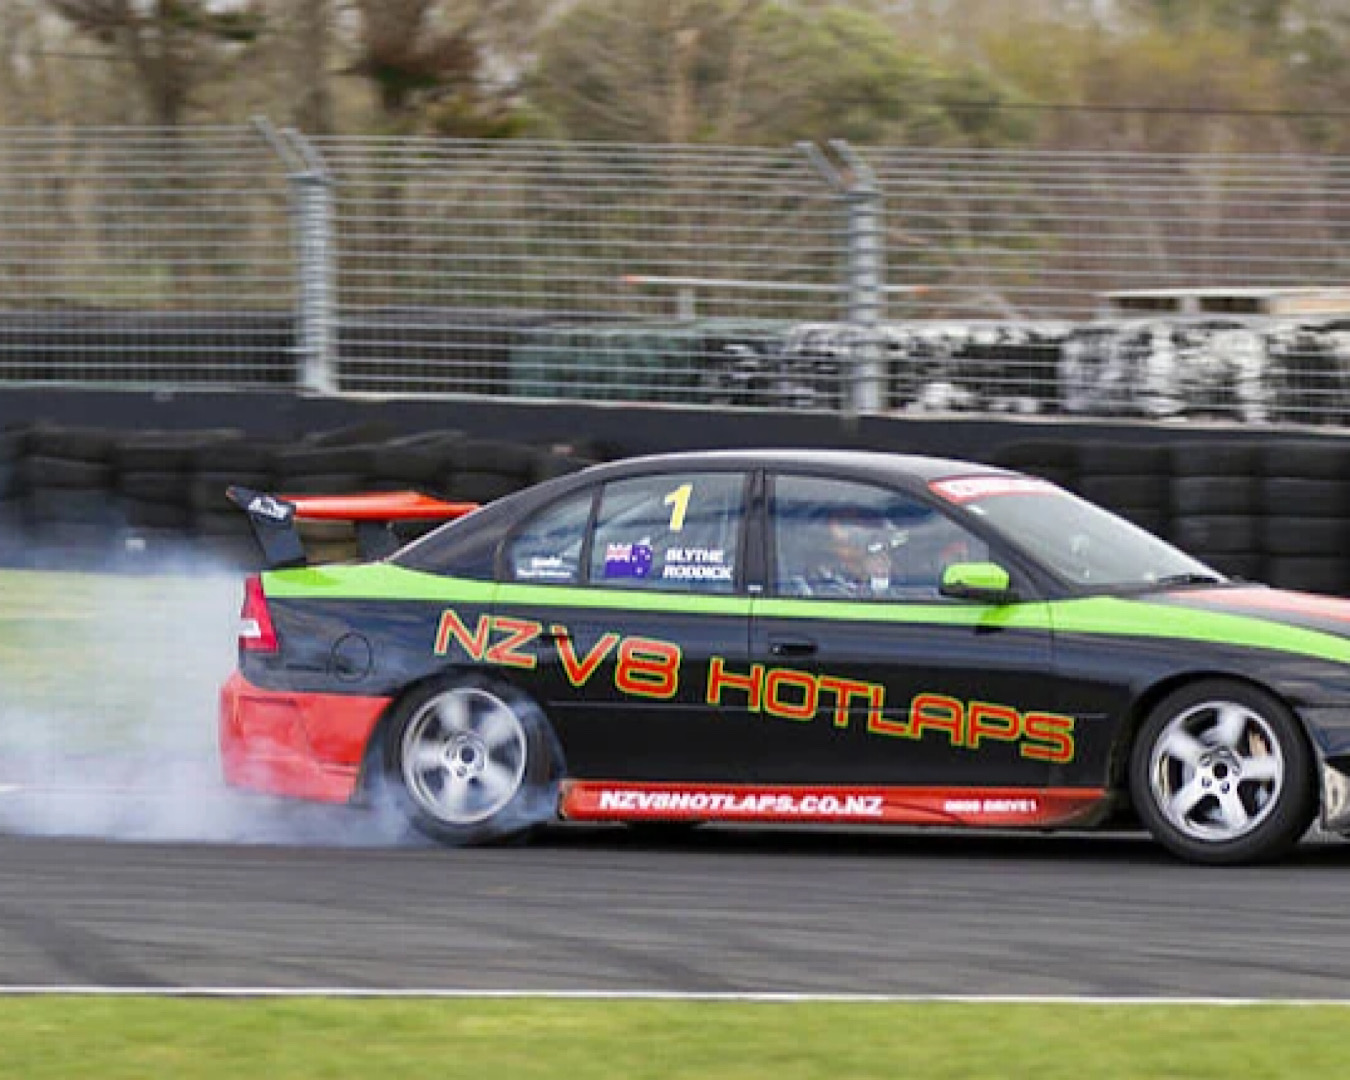 A stoked dad hoons around a race track in a Holden V8 Commodore, gloating about having received the perfect Father’s Day gift.  